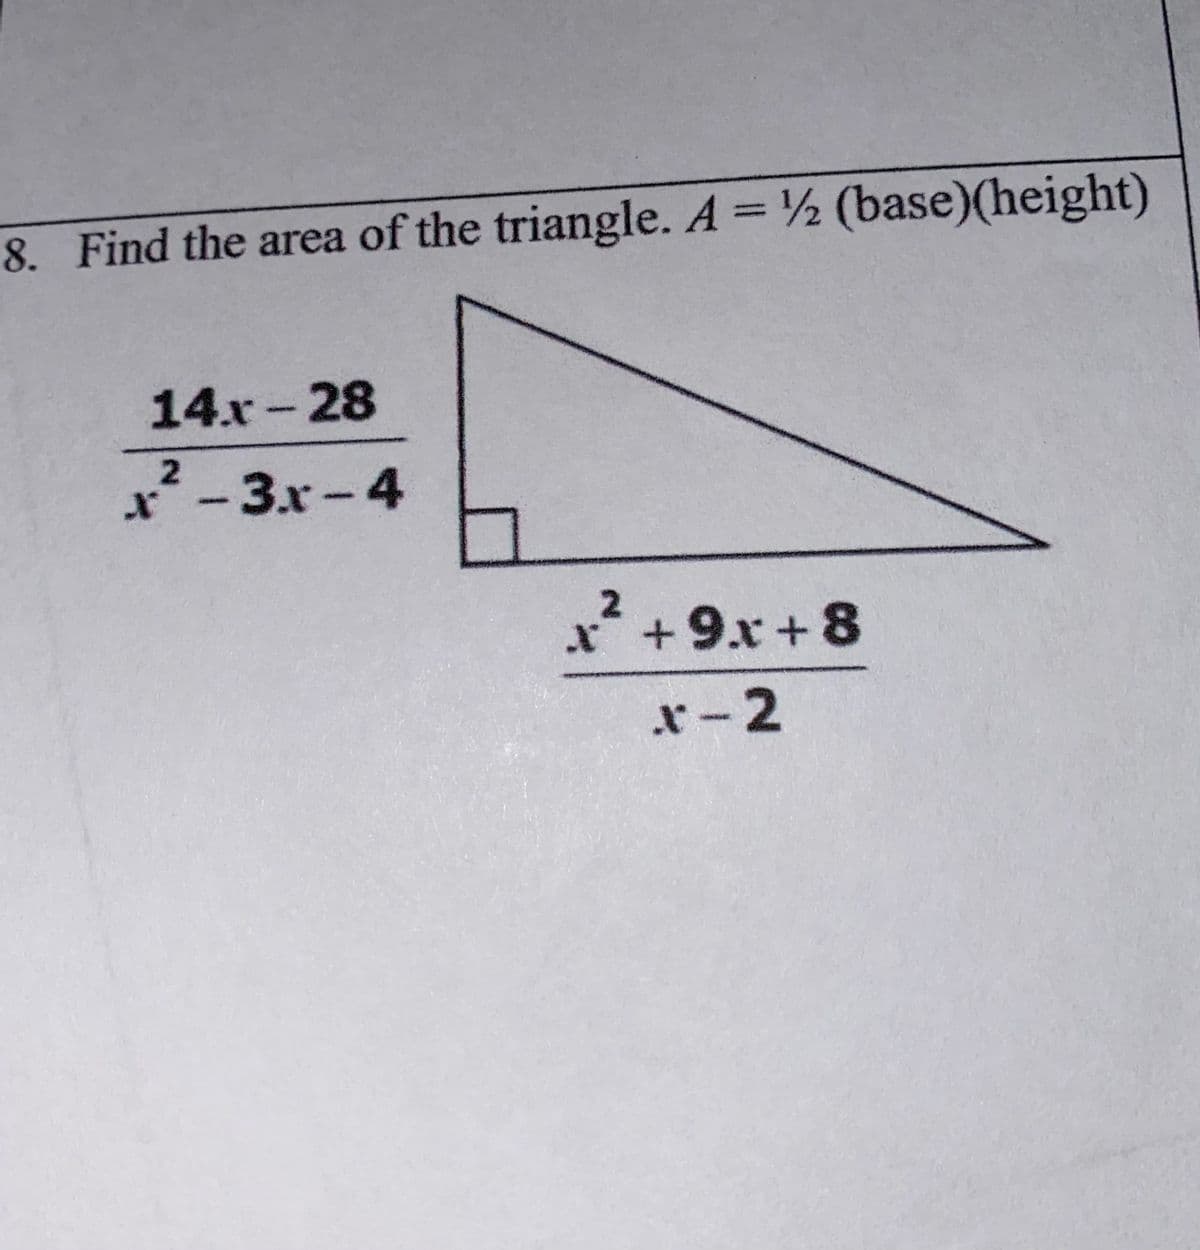 8. Find the area of the triangle. A = ½ (base)(height)
%3D
14.x-28
-3x-4
*
+9.x+8
r-2
